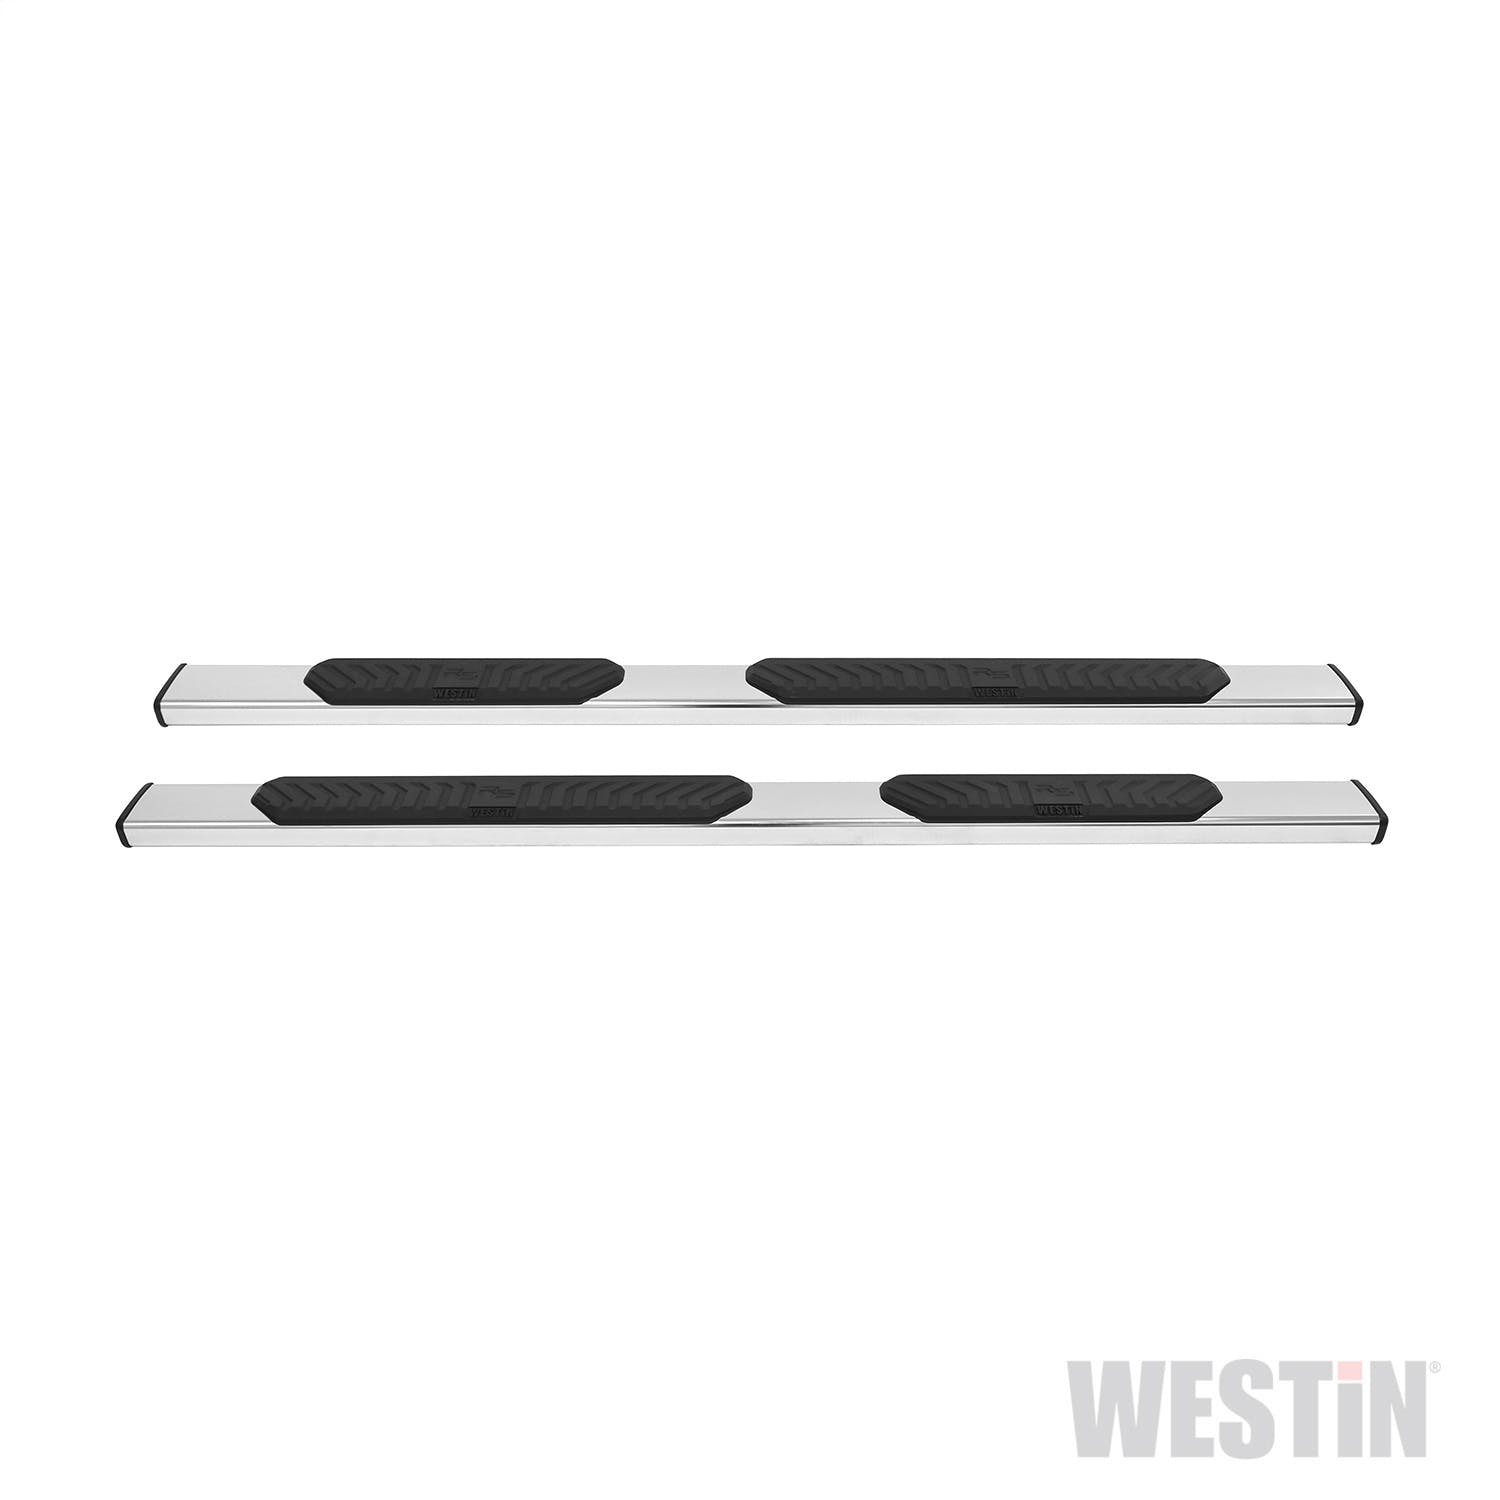 Westin Automotive 28-51040 R5 Nerf Step Bars Stainless Steel